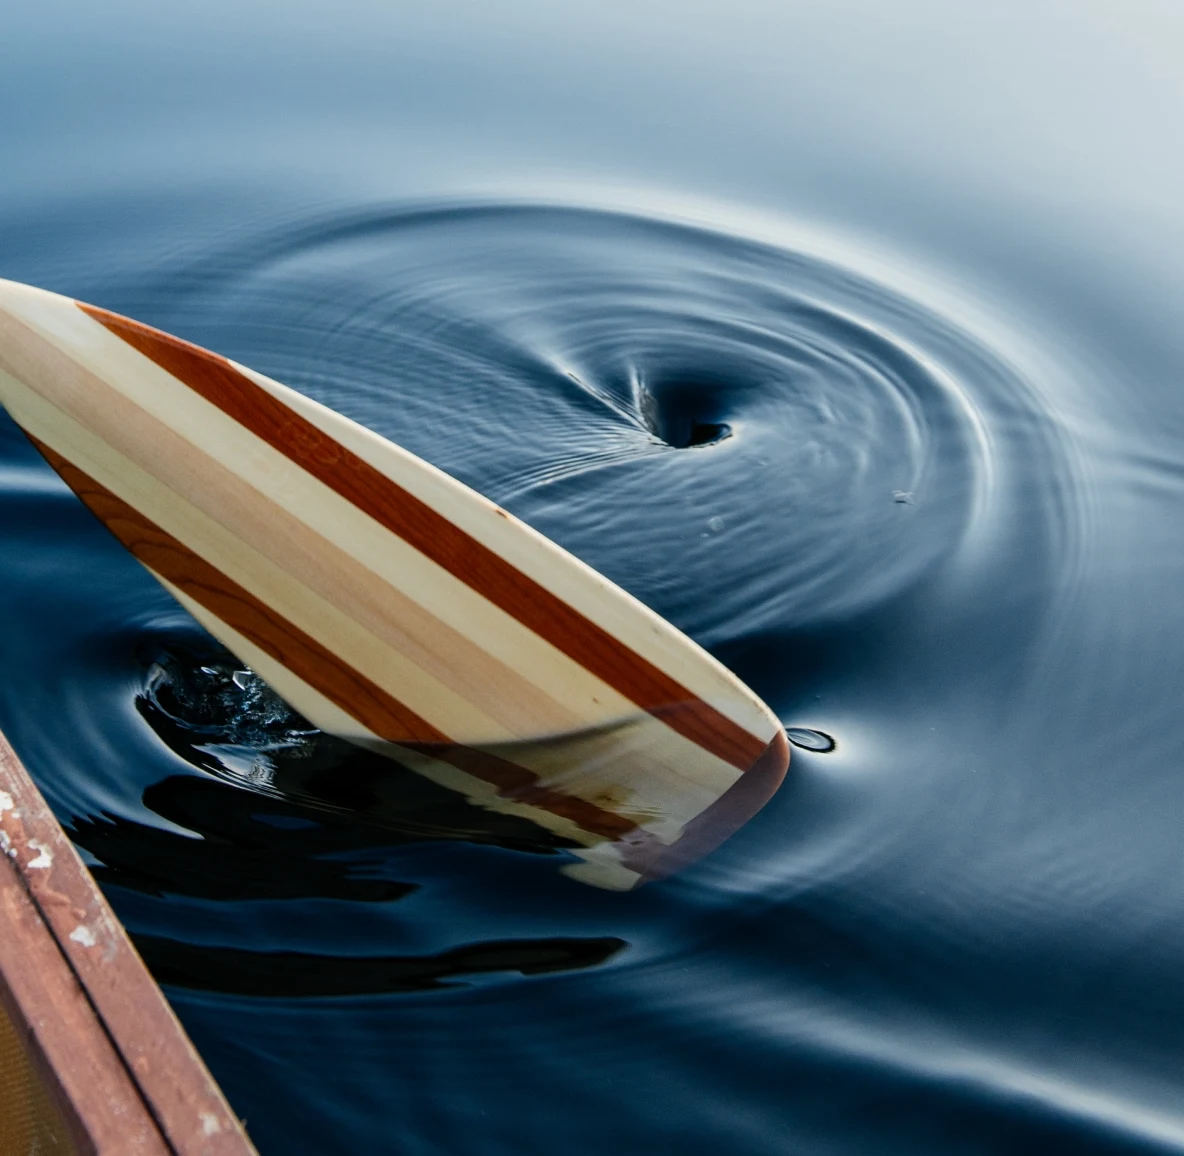 A brown and tan surfboard floats out of a whirlpool of deep blue water